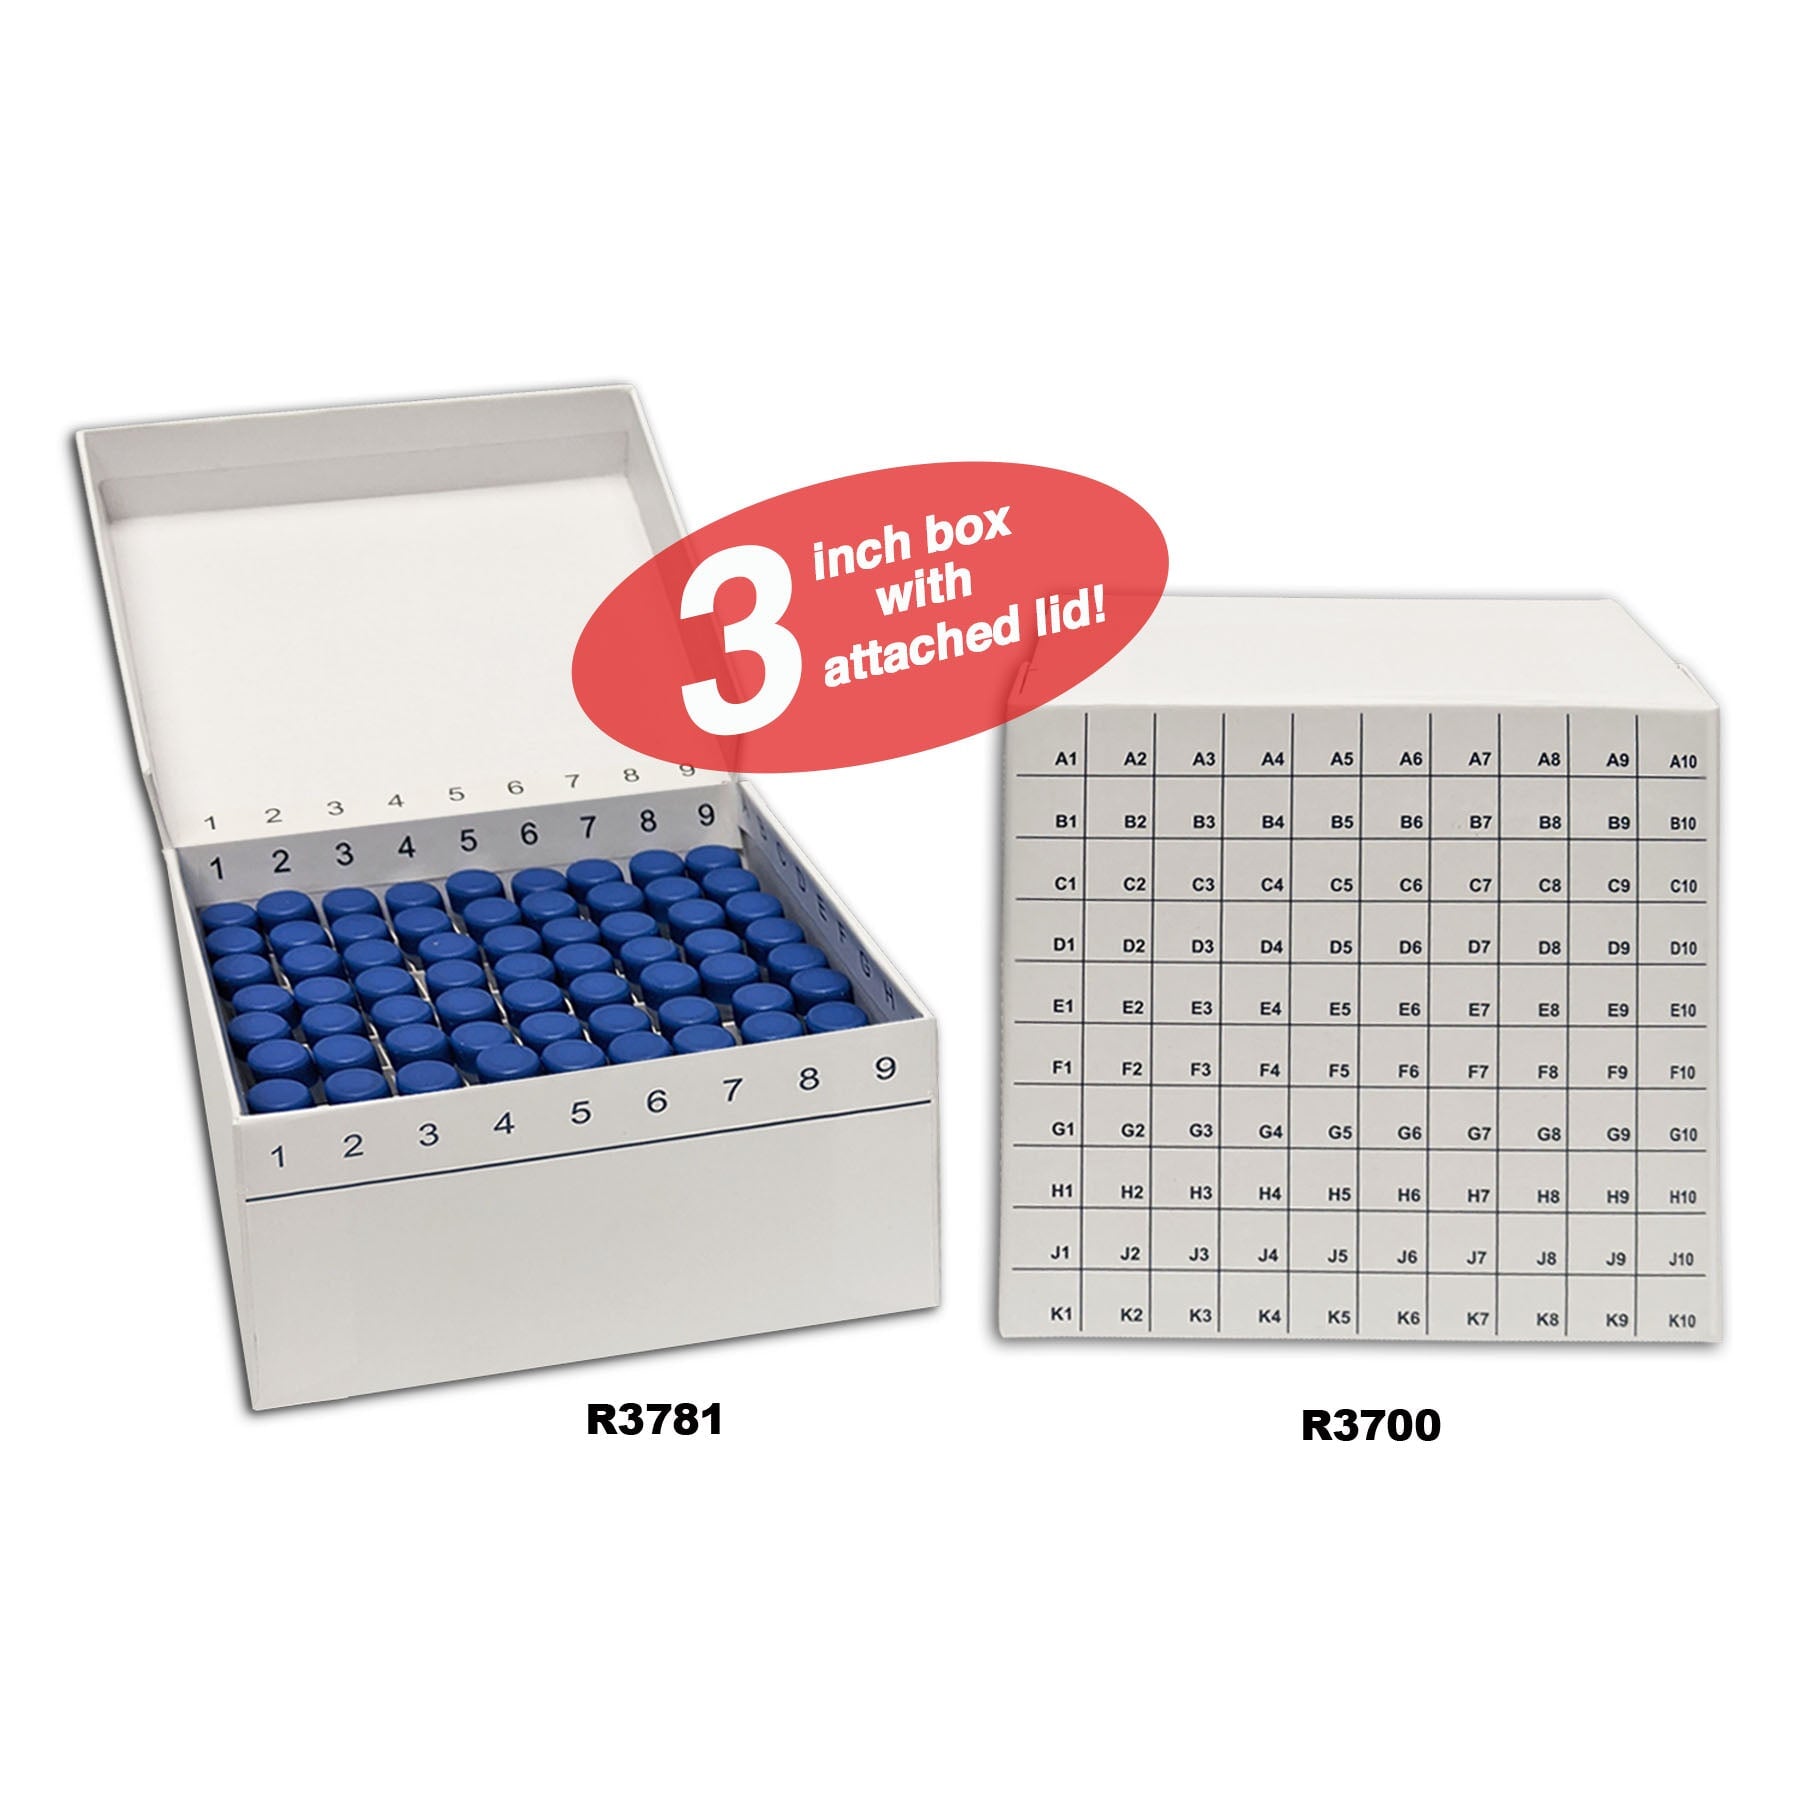 MTC Bio R3781 FlipTop™ Carboard freezer box w/ attached hinged lid, 81-place, white, 50/cs